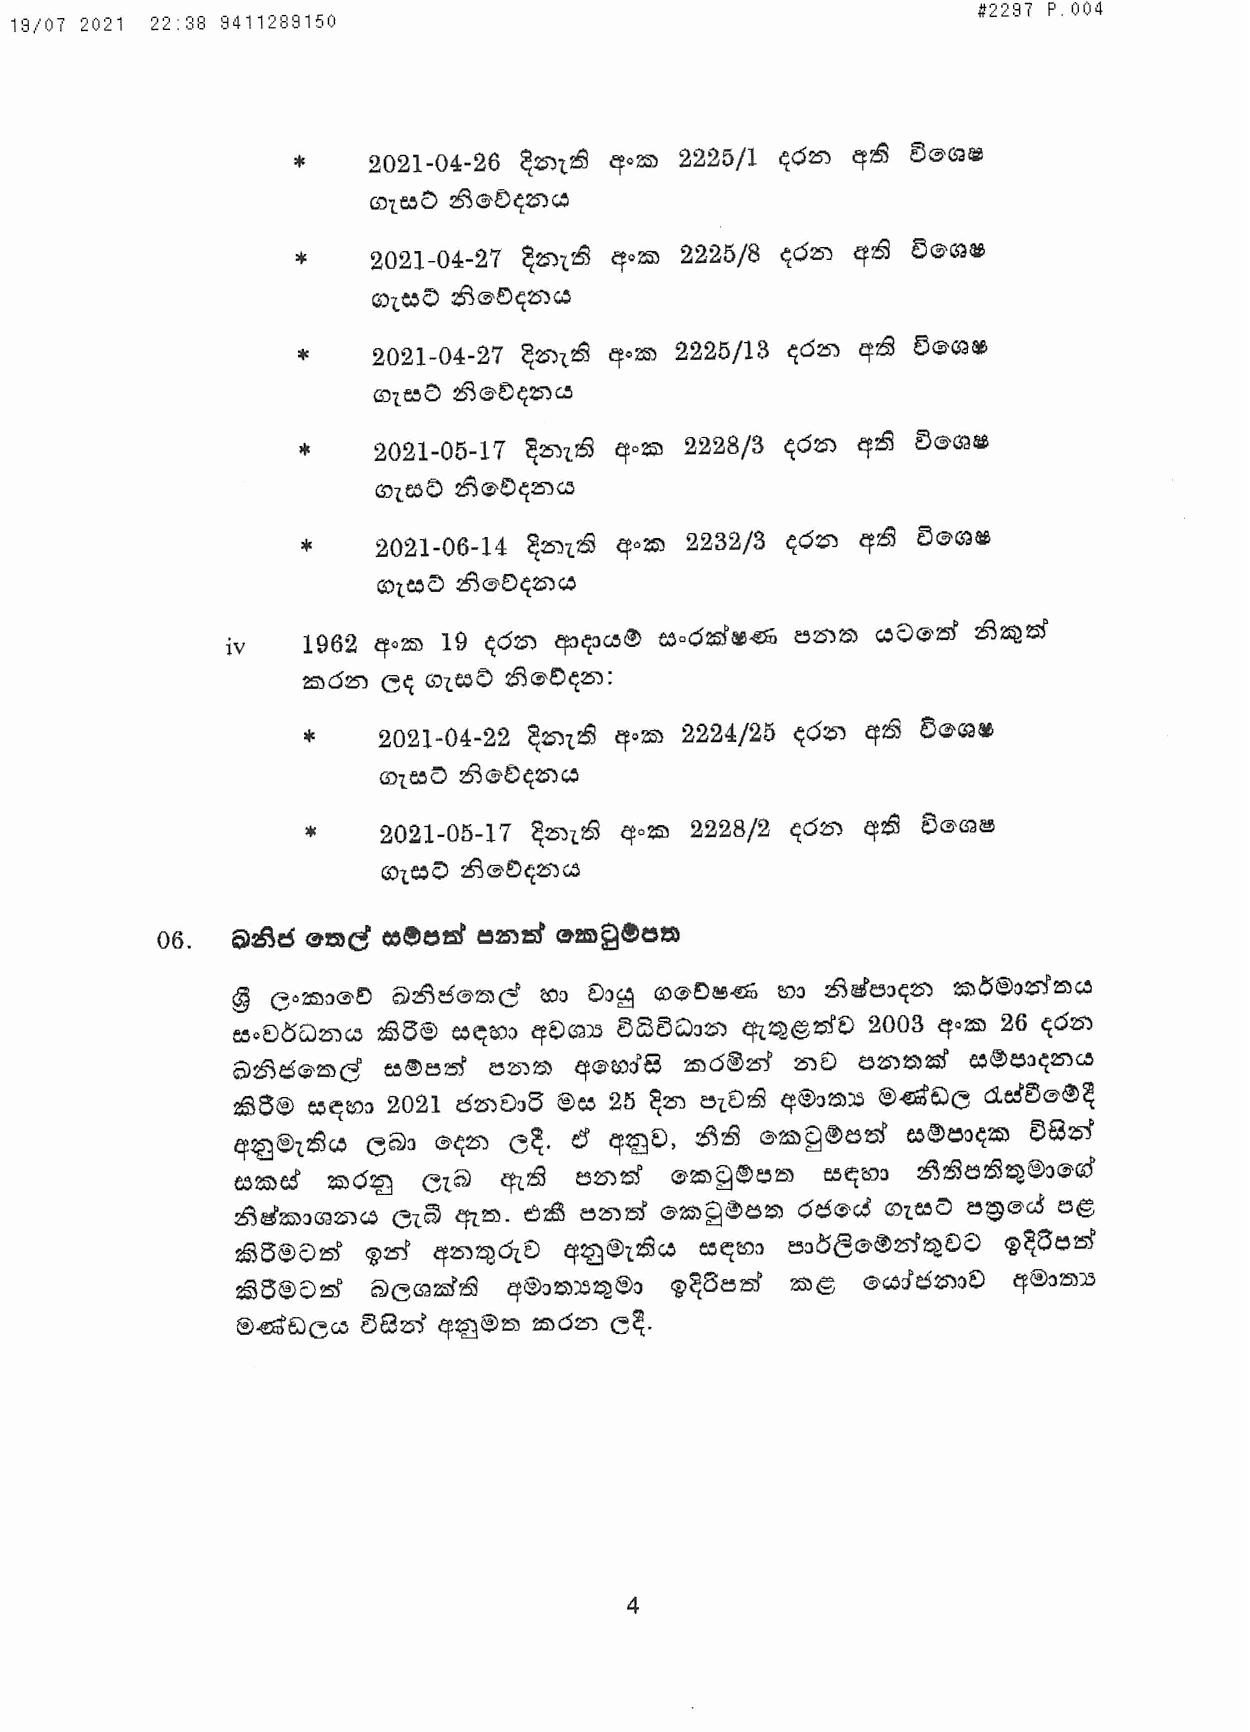 Cabinet Decision on 19.07.2021 page 004